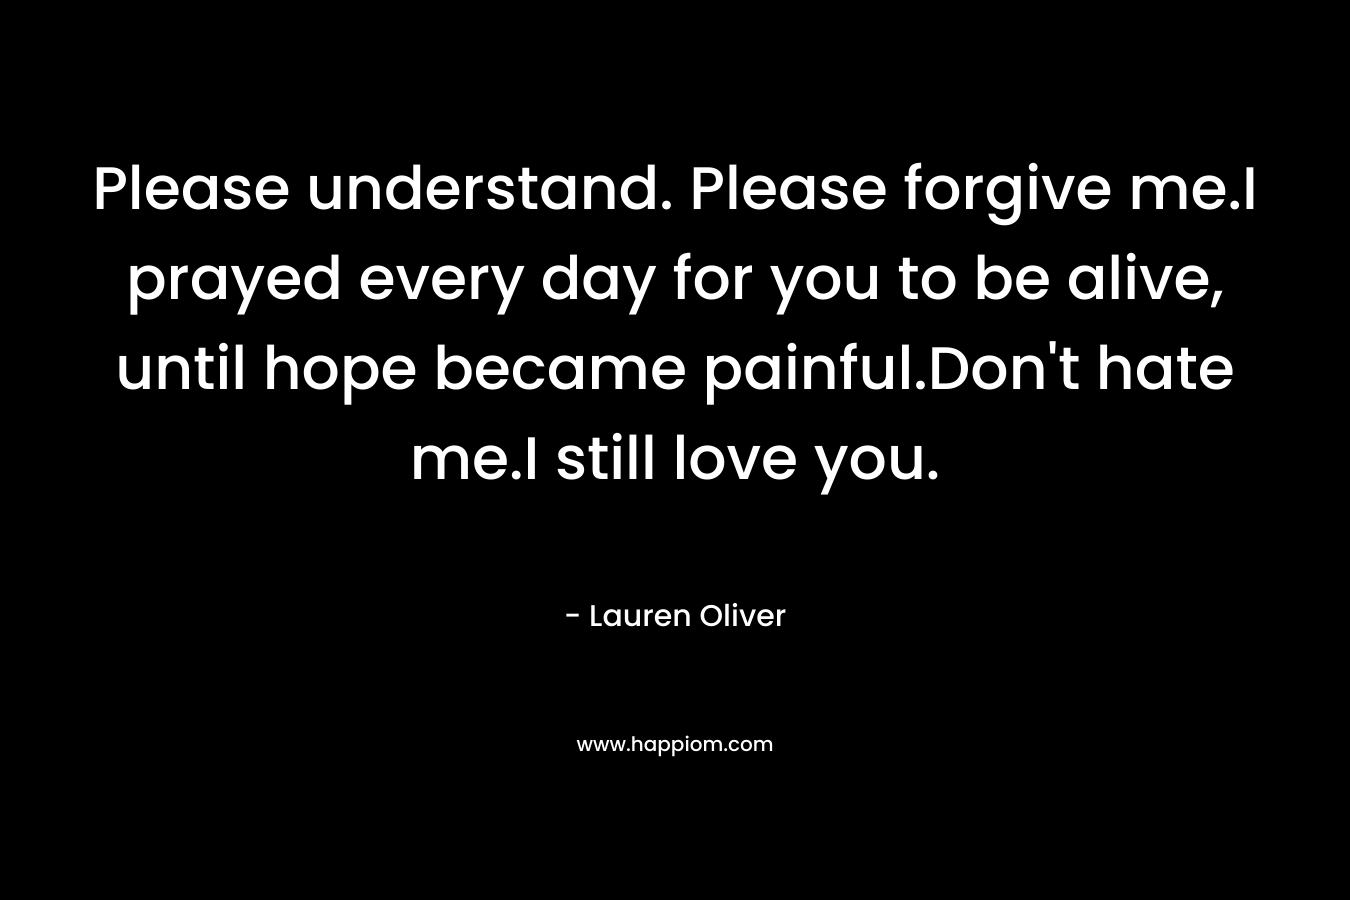 Please understand. Please forgive me.I prayed every day for you to be alive, until hope became painful.Don’t hate me.I still love you. – Lauren Oliver